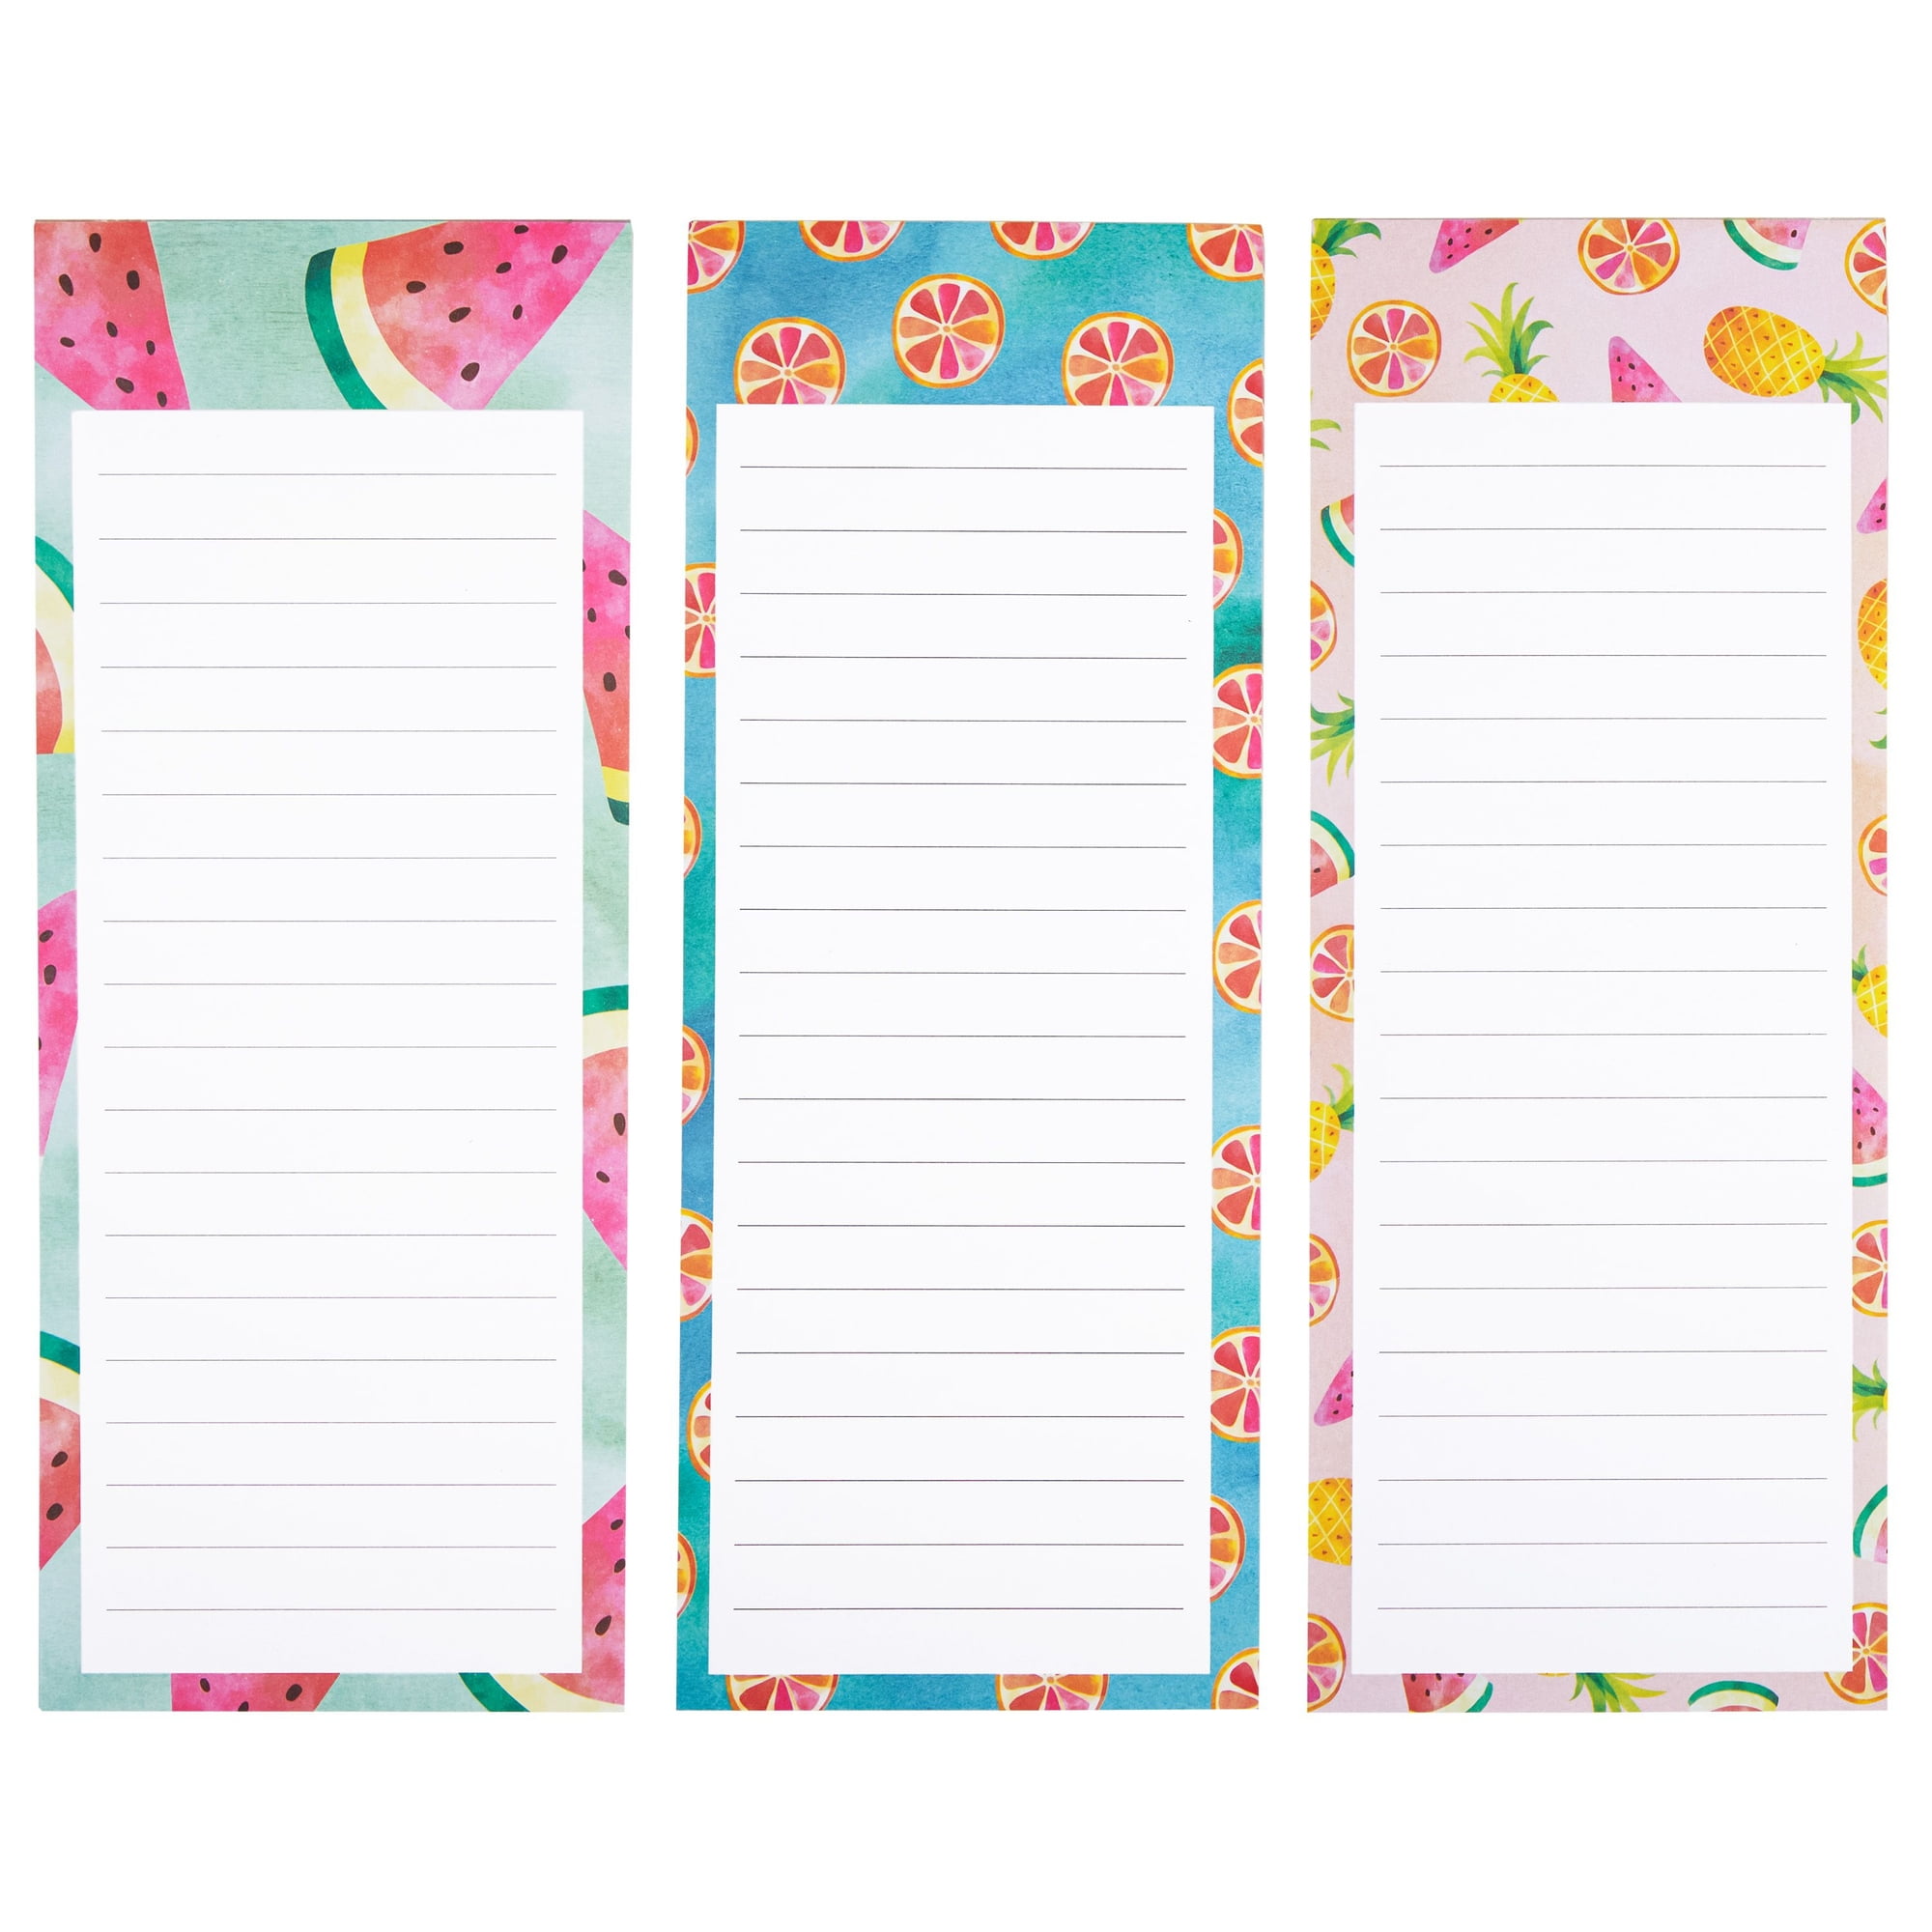 Notepads for Grocery List, Shopping List, Recipes Note Pad, 6 Pack Memo  Notepad for Office Supplies To-Do List, Reminders Small Work Note Pads 4x6  In